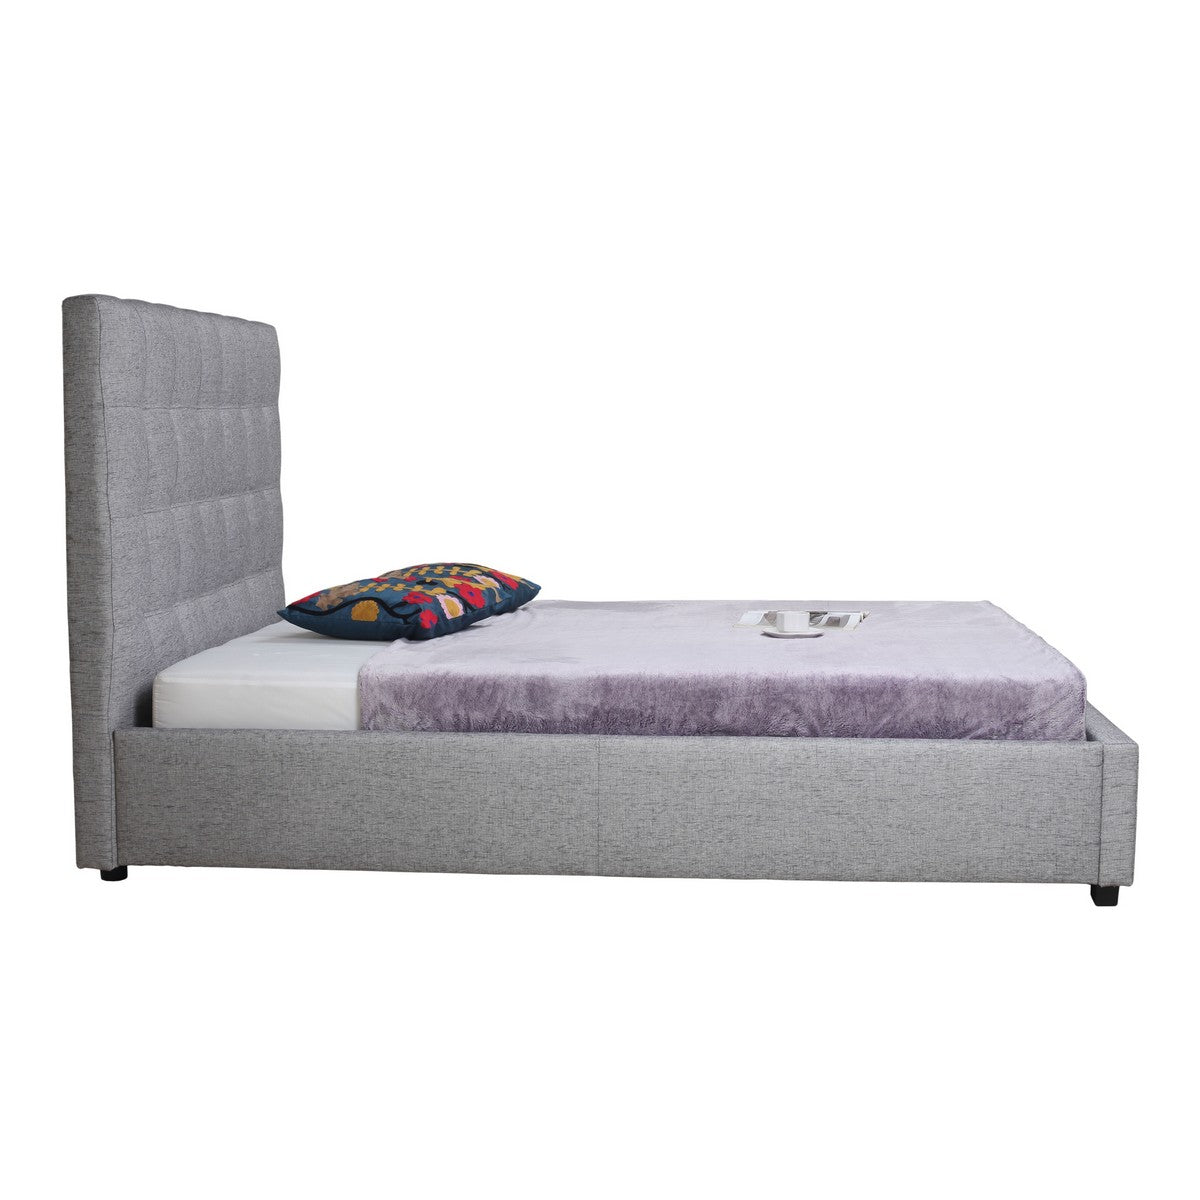 Moe's Home Collection Belle Storage Bed Queen Light Grey Fabric - RN-1000-29